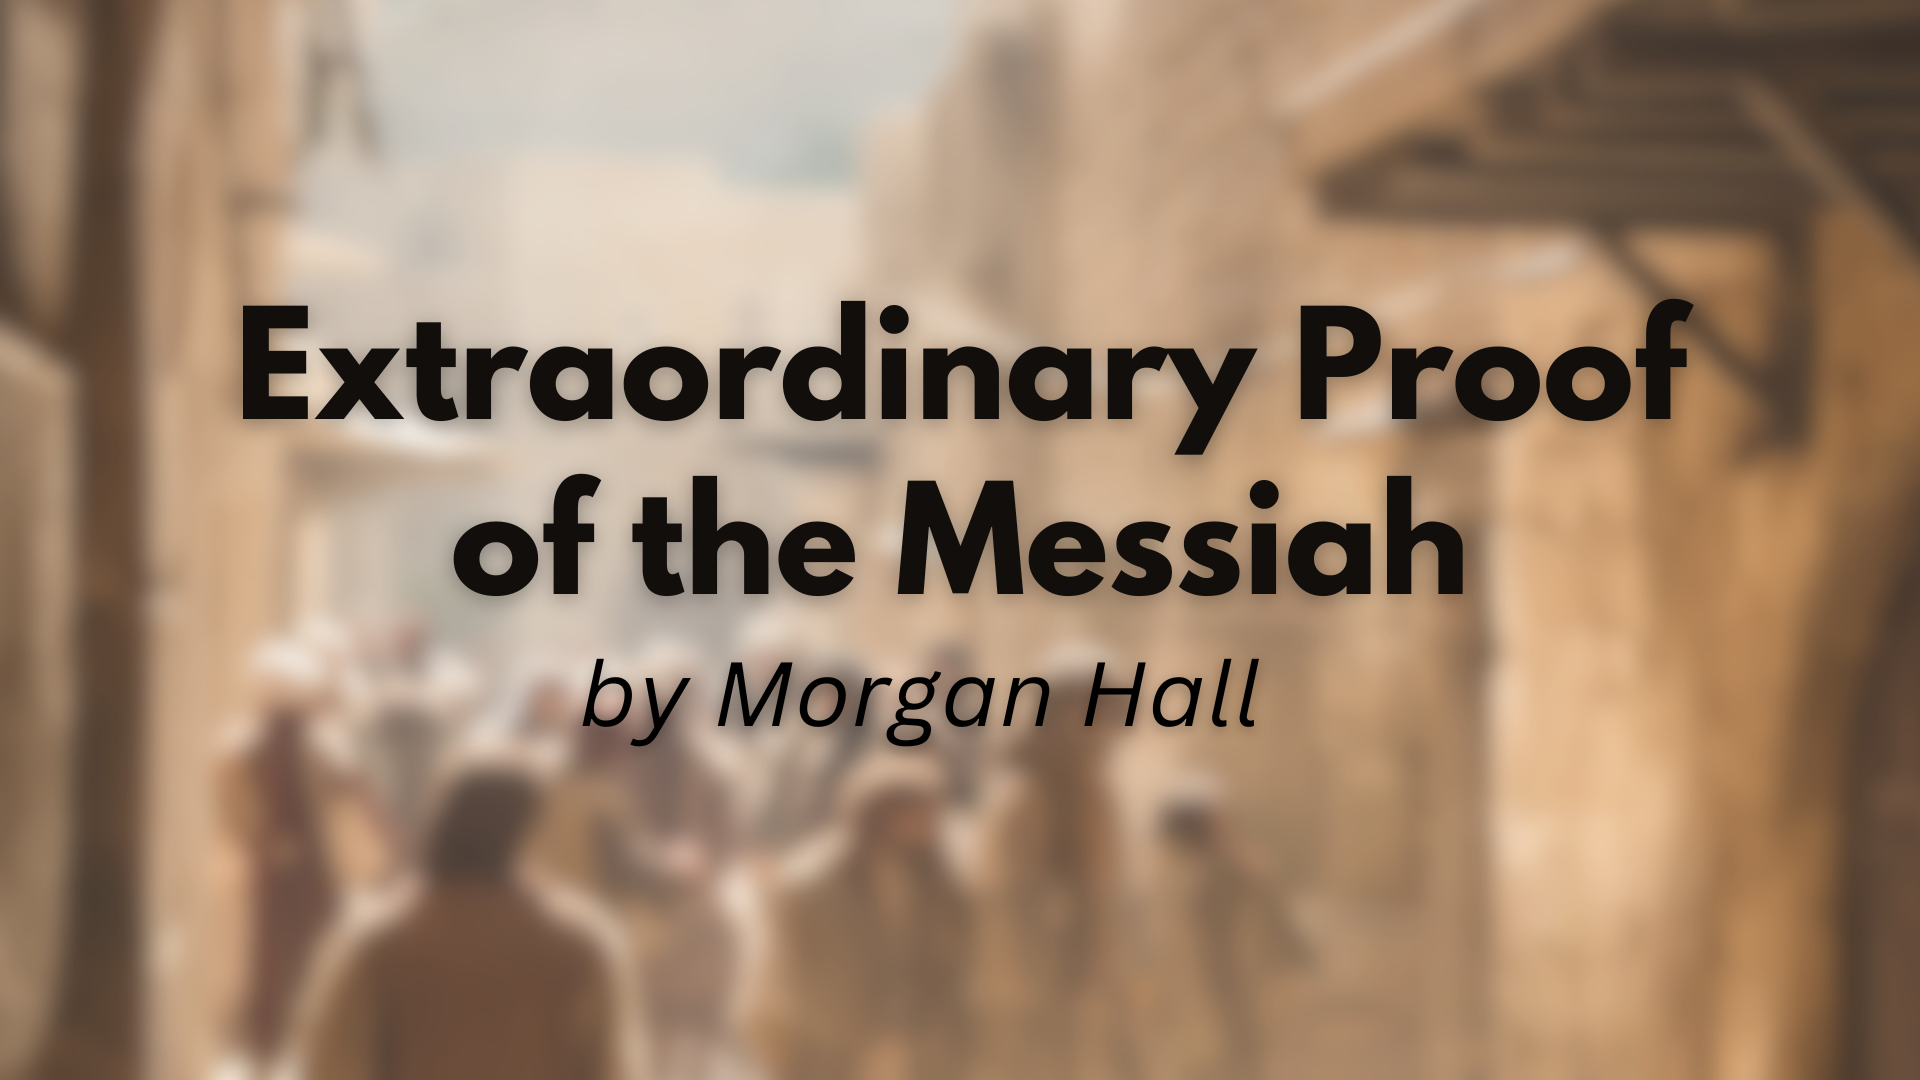 Extraordinary Proof of the Messiah